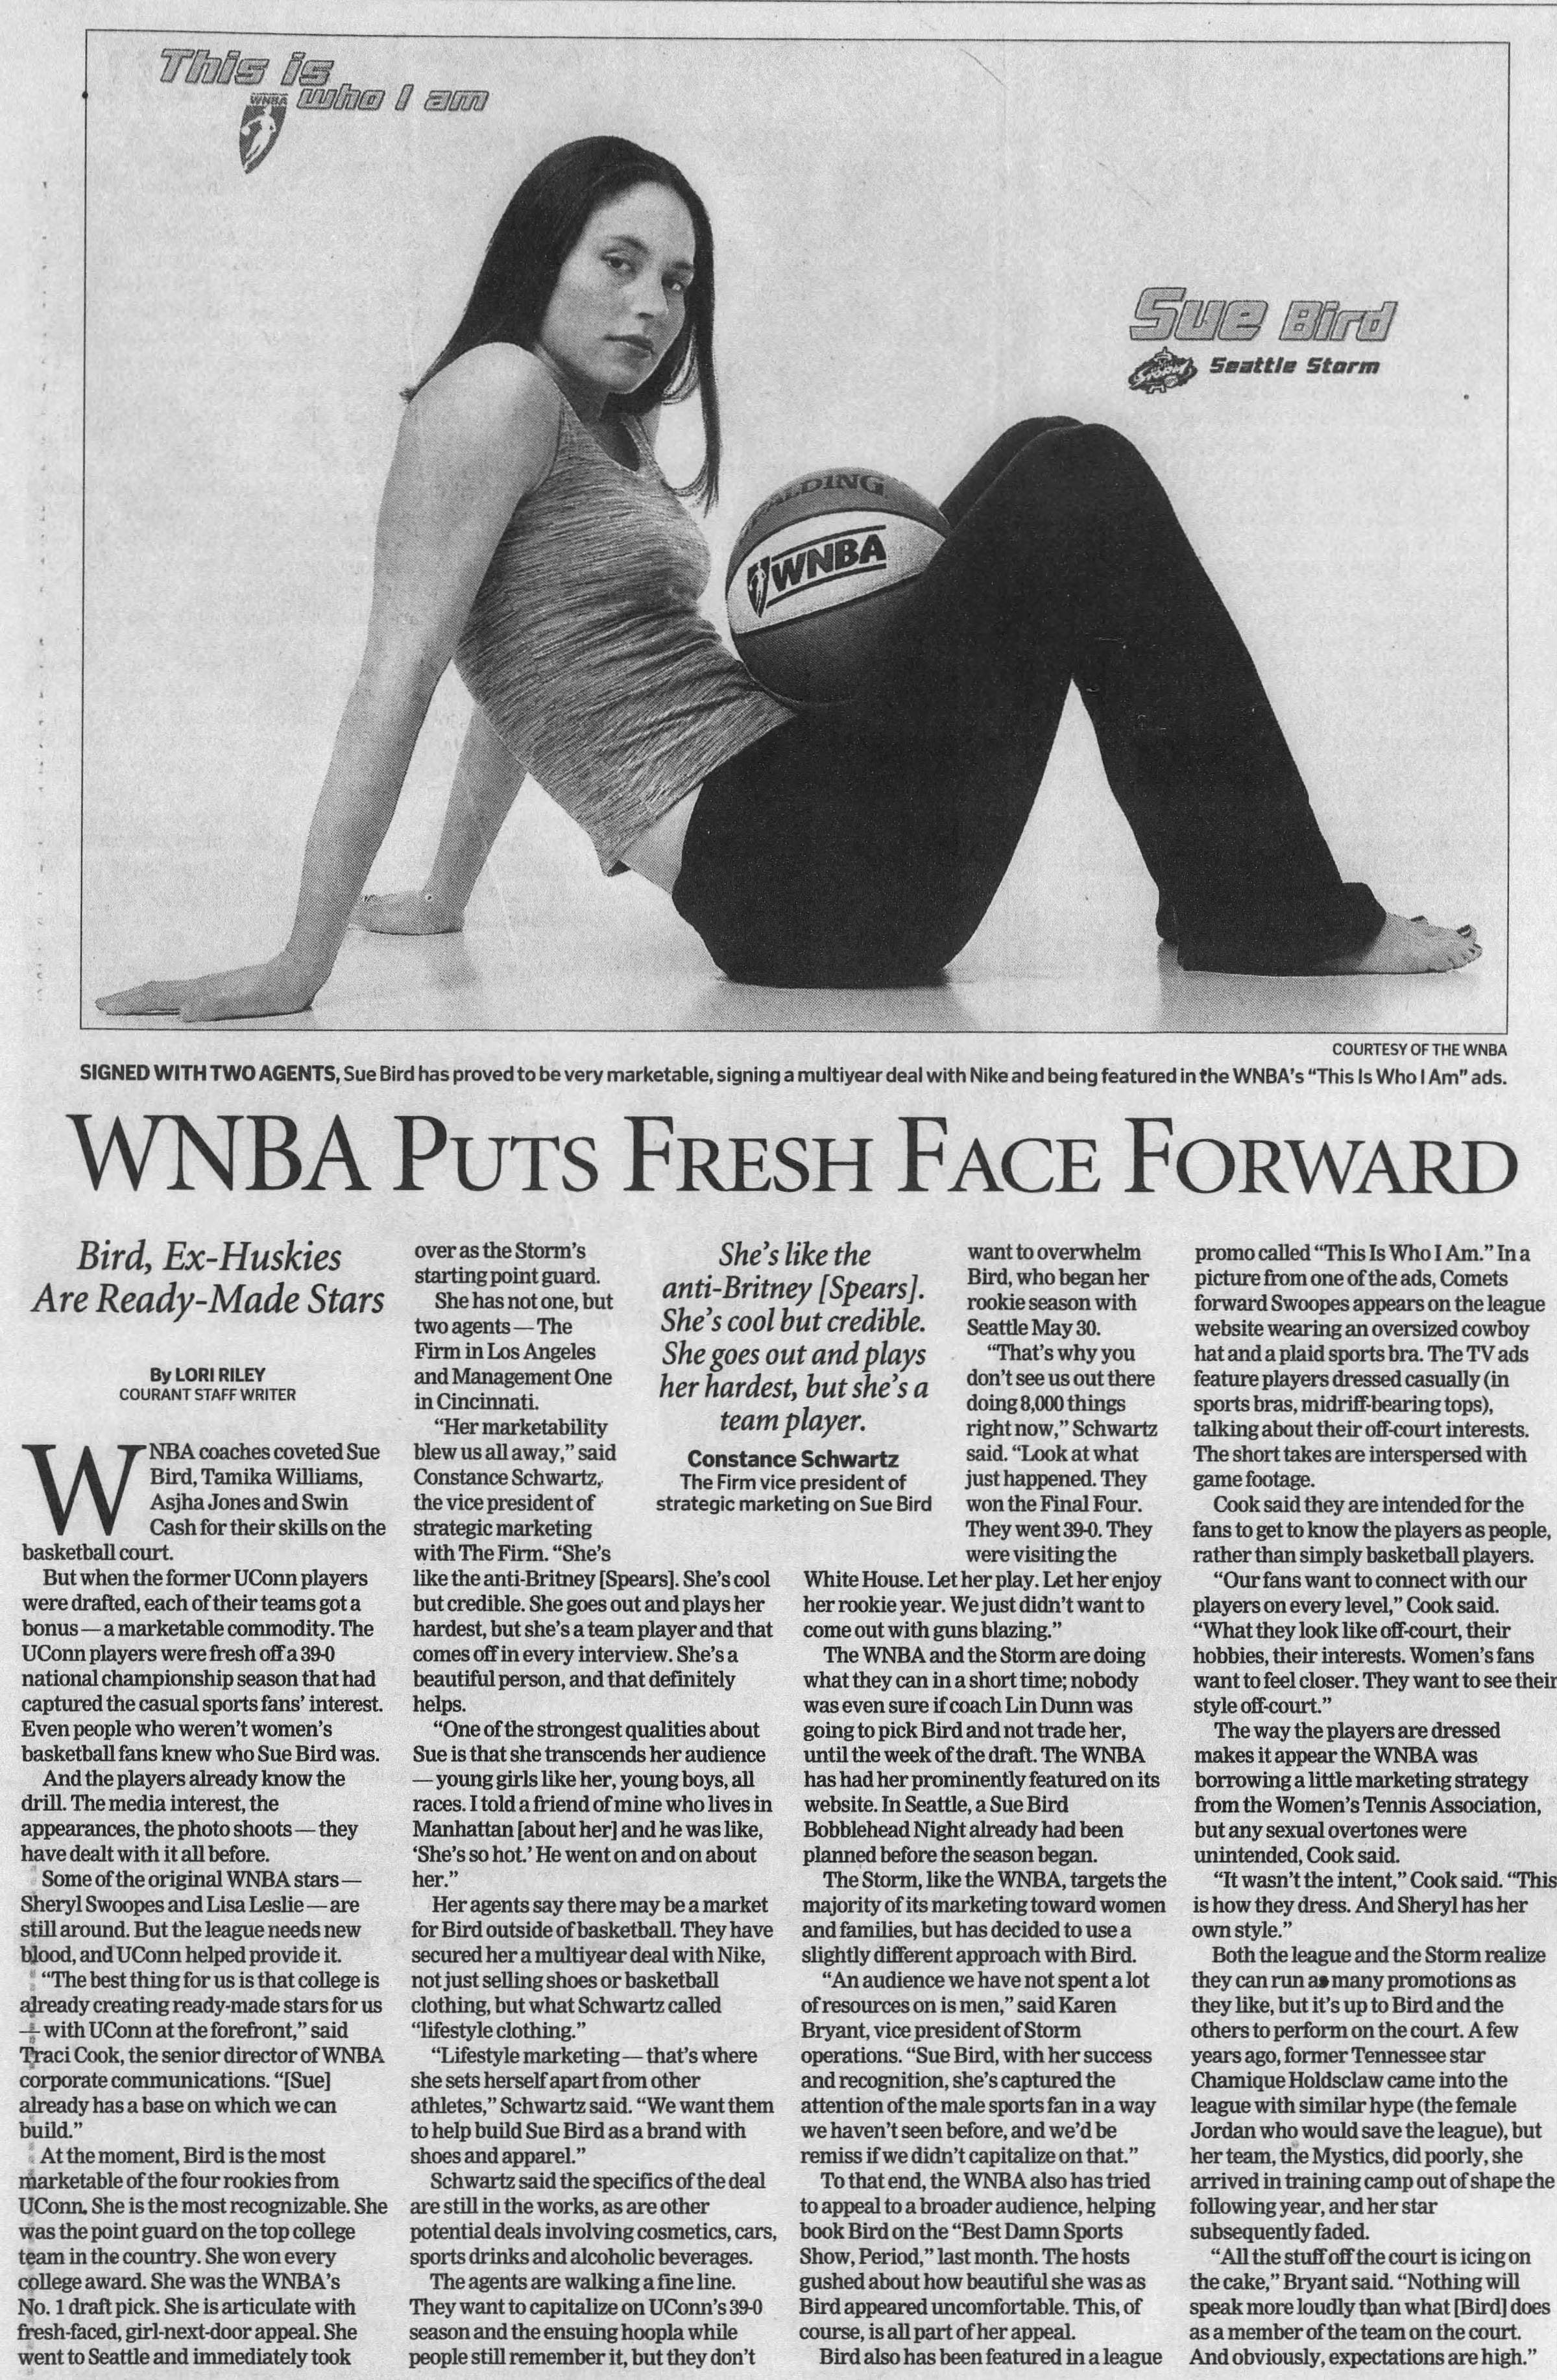 ' r Seattle Storm J COURTESY OF THE WNBA SIGNED WITH TWO AGENTS, Sue Bird has proved to be very marketable, signing a multiyear deal with Nike and being featured in the WNBA's "This Is Who I Am" ads. WNBA Puts Fresh Face Forward Bird, Ex-Huskies Are Ready-Made Stars ByLORI RILEY COURANT STAFF WRITER WNBA coaches coveted Sue Bird, Tamika Williams, Asjha Jones and Swin Cash for their skills on the basketball court But when the former UConn players were drafted, each of their teams got a bonus a marketable commodity. The UConn players were fresh offa 39-0 national championship season that had captured the casual sports fans' interest. Even people who weren't women's basketball fans knew who Sue Bird was. And the players already know the drilL The media interest, the appearances, the photo shoots they have dealt with it all before. Some of the original WNBA stars Sheryl Swoopes and Lisa Leslie are still around. But the league needs new bjood, and UConn helped provide it I "The best thing for us is that college is ajready creating ready-made stars for us -l with UConn at the forefront" said TJraci Cook, the senior director of WNBA corporate communications. "Sue already has a base on which we can build." At the moment Bird is the most marketable of the four rookies from UConn, She is the most recognizable. She was the point guard on the top college team in the country. She won every college award. She was the WNBA's No. 1 draft pick. She is articulate with fresh-faced, girl-next-door appeal She went to Seattle and immediately took over as the Storm's starting point guard. She has not one, but two agents The Firm in Los Angeles and Management One in Cincinnati "Her marketability blew us all away," said Constance Schwartz, the vice president of strategic marketing with The Firm. "She's like the anti-Britney Spears. She's cool but credible. She goes out and plays her hardest but she's a team player and that comes off in every interview. She's a beautiful person, and that definitely helps. "One of the strongest qualities about Sue is that she transcends her audience young girls like her, young boys, all races. I told a friend of mine who lives in Manhattan about her and he was like, 'She's so hot' He went on and on about her." Her agents say there may be a market for Bird outside of basketball They have secured her a multiyear deal with Nike, not just selling shoes or basketball clothing, but what Schwartz called "lifestyle clothing." "Lifestyle marketing that's where she sets herself apart from other athletes," Schwartz said. "We want them to help build Sue Bird as a brand with shoes and appareL" Schwartz said the specifics of the deal are still in the works, as are other potential deals involving cosmetics, cars, sports drinks and alcoholic beverages. The agents are walking a fine line. They want to capitalize on UConn's 39-0 season and the ensuing hoopla while people still remember it but they don't She's like the anti-Britney Spears . She's cool but credible. She goes out and plays her hardest, but she's a team player. Constance Schwartz The Firm vice president of strategic marketing on Sue Bird want to overwhelm Bird, who began her rookie season with Seattle May 30. "That's why you don't see us out there doing 8,000 things right now," Schwartz said. "Look at what just happened. They won the Final Four. They went 39-0. They were visiting the White House. Let her play. Let her enjoy her rookie year. We just didn't want to come out with guns blazing." The WNBA and the Storm are doing what they can in a short time; nobody was even sure if coach Lin Dunn was going to pick Bird and not trade her, until the week of the draft. The WNBA has had her prominently featured on its website. In Seattle, a Sue Bird Bobblehead Night already had been planned before the season began. The Storm, like the WNBA, targets the majority of its marketing toward women and families, but has decided to use a slightly different approach with Bird. "An audience we have not spent a lot of resources on is men," said Karen Bryant vice president of Storm operations. "Sue Bird, with her success and recognition, she's captured the attention of the male sports fan in a way we haven't seen before, and we'd be remiss if we didn't capitalize on that" To that end, the WNBA also has tried to appeal to a broader audience, helping book Bird on the "Best Damn Sports Show, Period," last month. The hosts gushed about how beautiful she was as Bird appeared uncomfortable. This, of course, is all part of her appeal Bird also has been featured in a league promo called "This Is Who I Am." In a picture from one of the ads, Comets forward Swoopes appears on the league website wearing an oversized cowboy hat and a plaid sports bra. The TV ads feature players dressed casually (in sports bras, midriff-bearing tops), talking about their off-court interests. The short takes are interspersed with game footage. Cook said they are intended for the fans to get to know the players as people, rather than simply basketball players. "Our fans want to connect with our players on every level," Cook said. "What they look like off-court, their hobbies, their interests. Women's fans want to feel closer. They want to see their style off-court" The way the players are dressed makes it appear the WNBA was borrowing a little marketing strategy from the Women's Tennis Association, but any sexual overtones were unintended, Cook said. "It wasn't the intent" Cook said. "This is how they dress. And Sheryl has her own style." Both the league and the Storm realize they can run a many promotions as they like, but it's up to Bird and the others to perform on the court A few years ago, former Tennessee star Chamique Holdsclaw came into the league with similar hype (the female Jordan who would save the league), but her team, the Mystics, did poorly, she arrived in training camp out of shape the following year, and her star subsequently faded. "All the stuff off the court is icing on the cake," Bryant said. "Nothing will speak more loudly than what Bird does as a member of the team on the court And obviously, expectations are high.